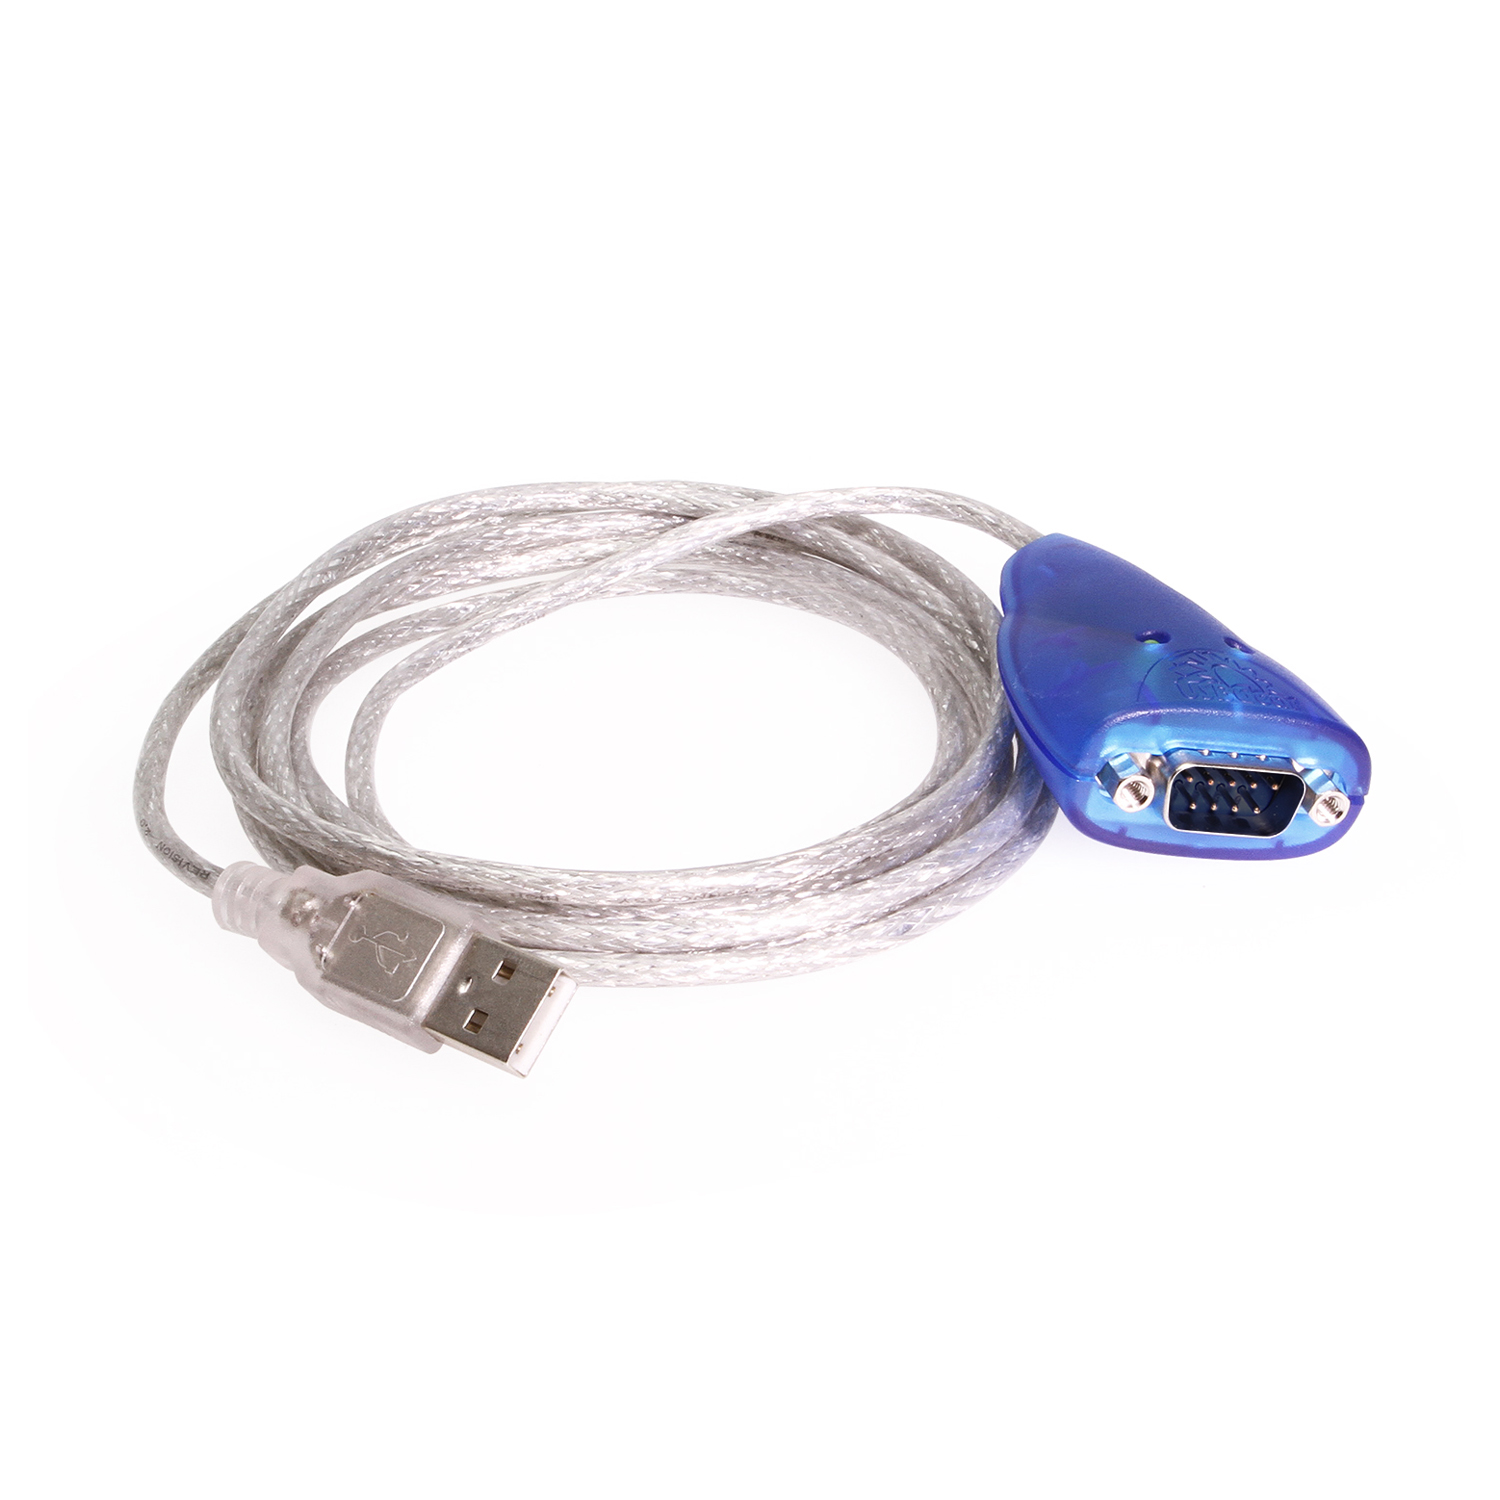 6ft. USB 2.0 to RS-232 DB-9 Serial Adapter w/ 15kV ESD Protection